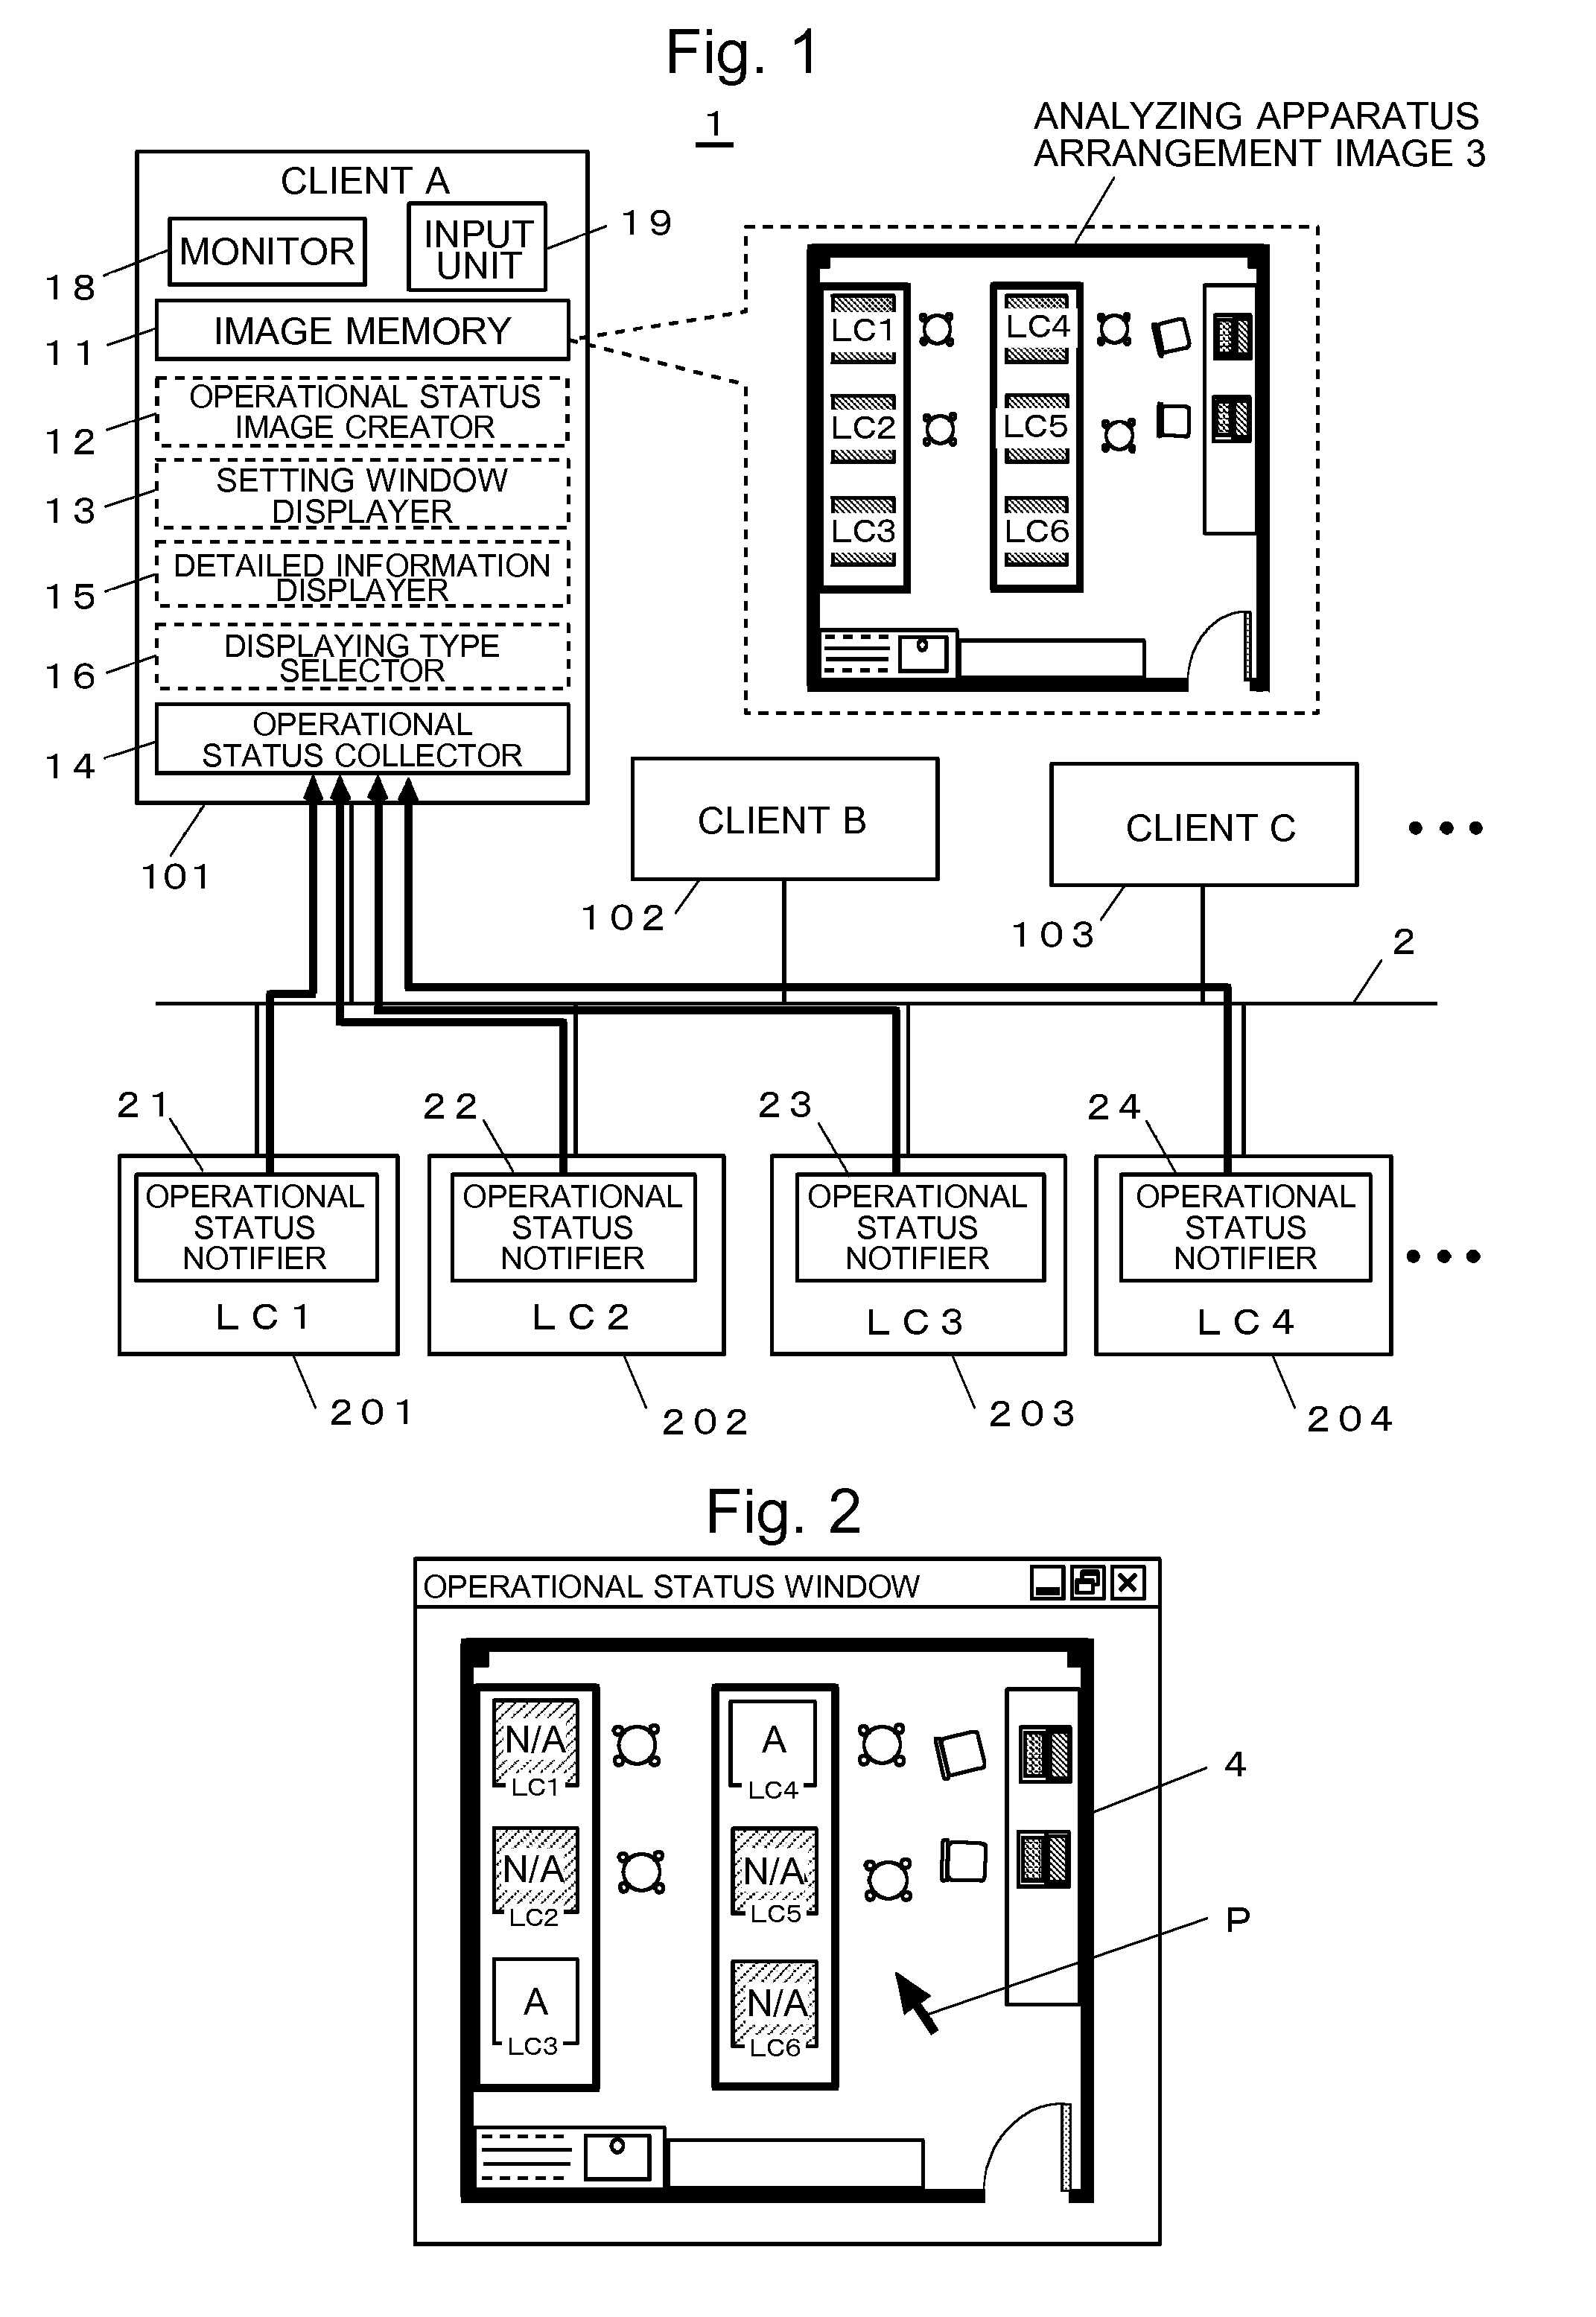 Operational status display system for analyzing apparatus